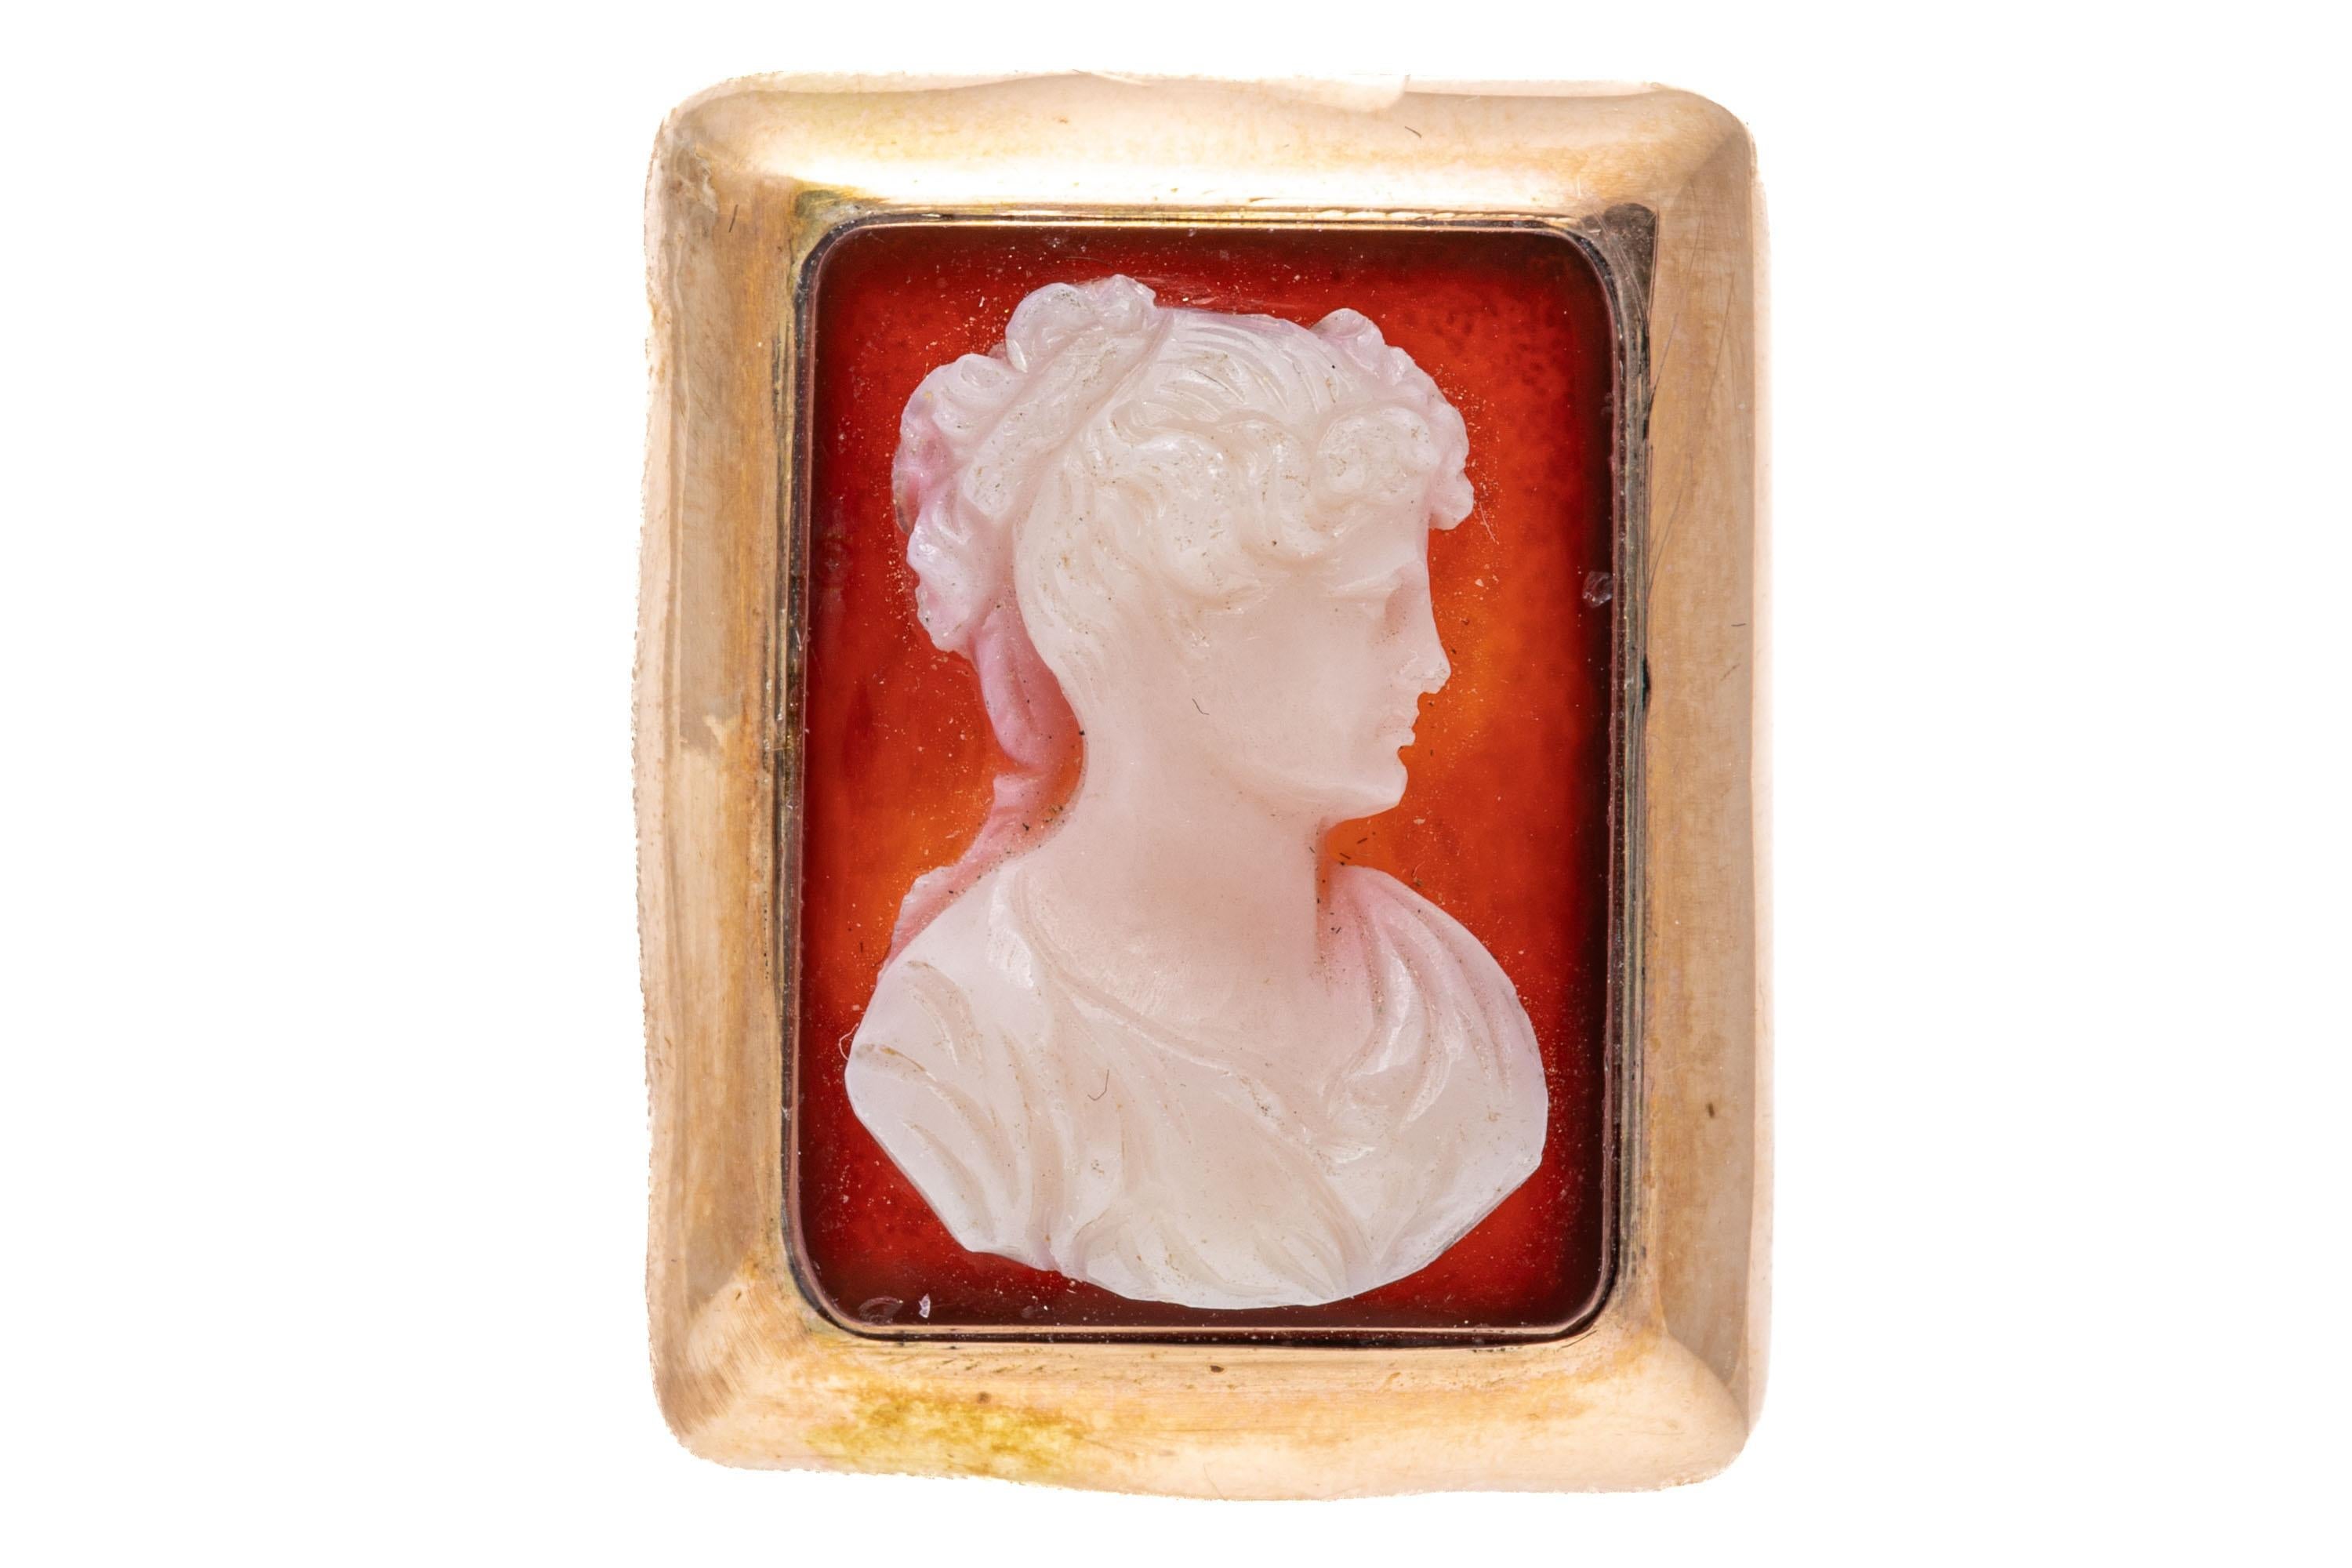 10k rose gold ring. This lovely vintage rectangular cameo ring has an orange background with a creamy white foreground of a handsome draped profile bust, facing to the right, and set off with a wide, high polished frame. The ring is also adorned